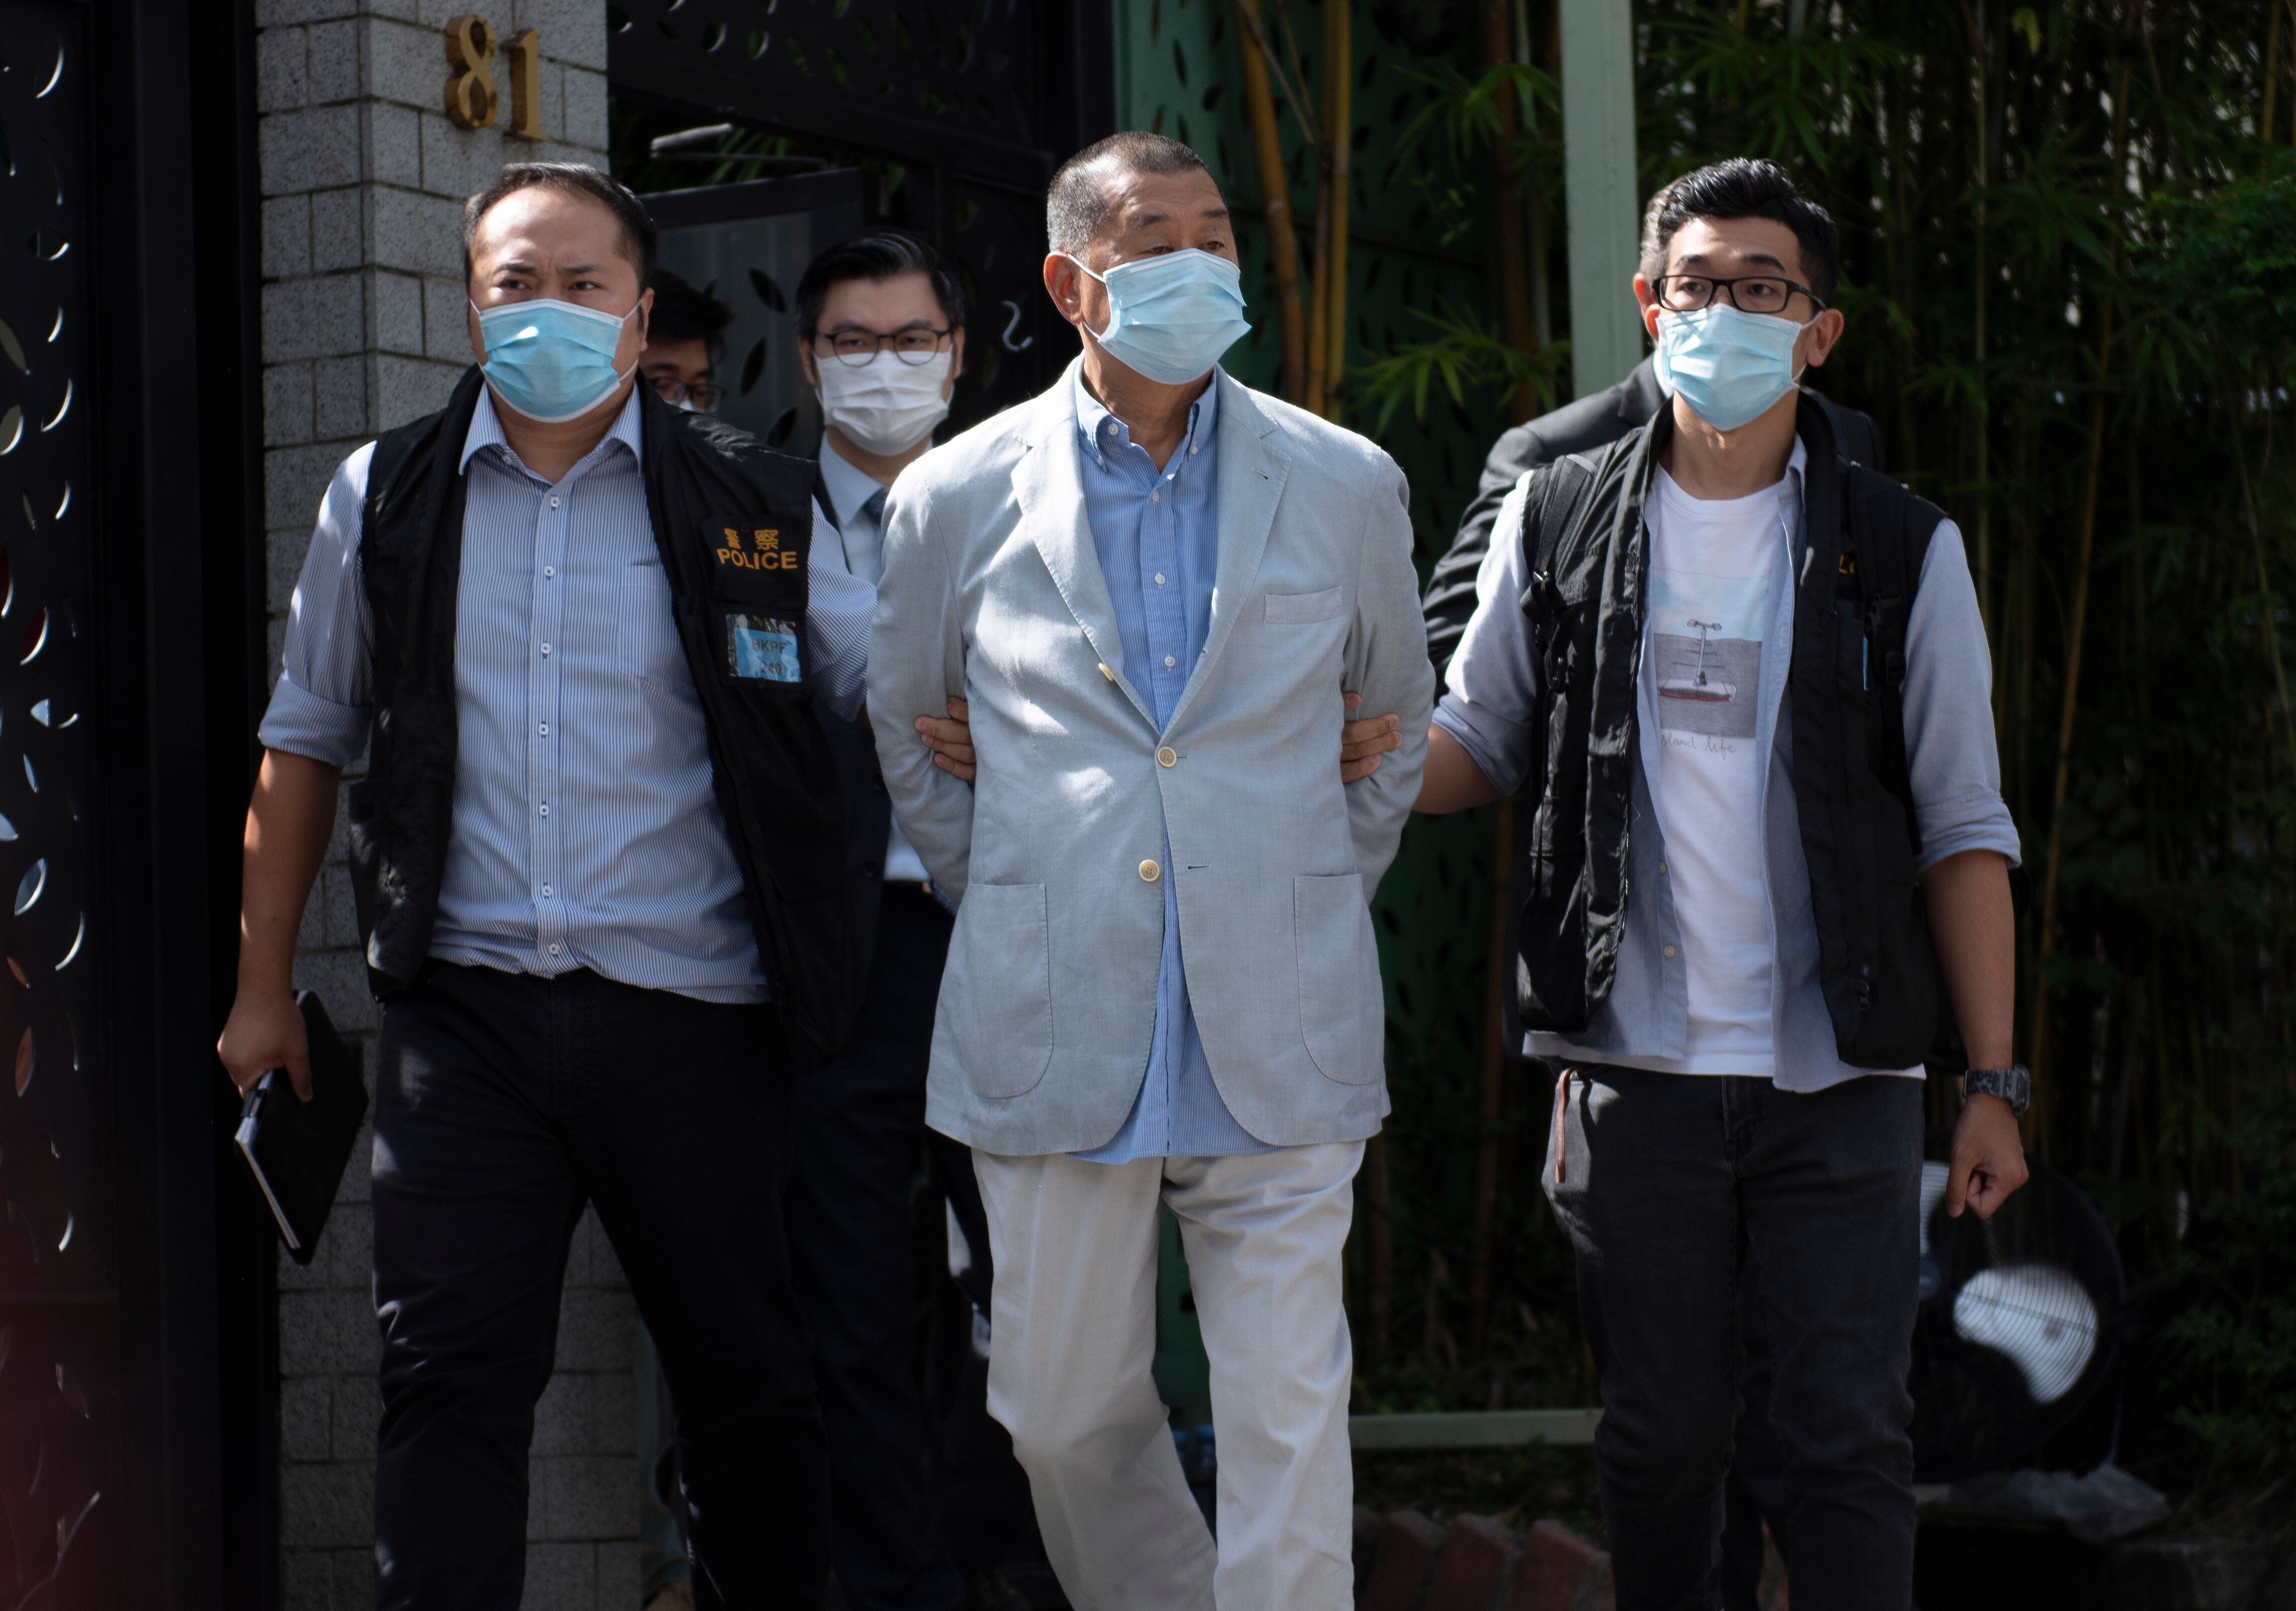 Jimmy Lai is escorted by police after he was arrested at his home in Hong Kong, China.